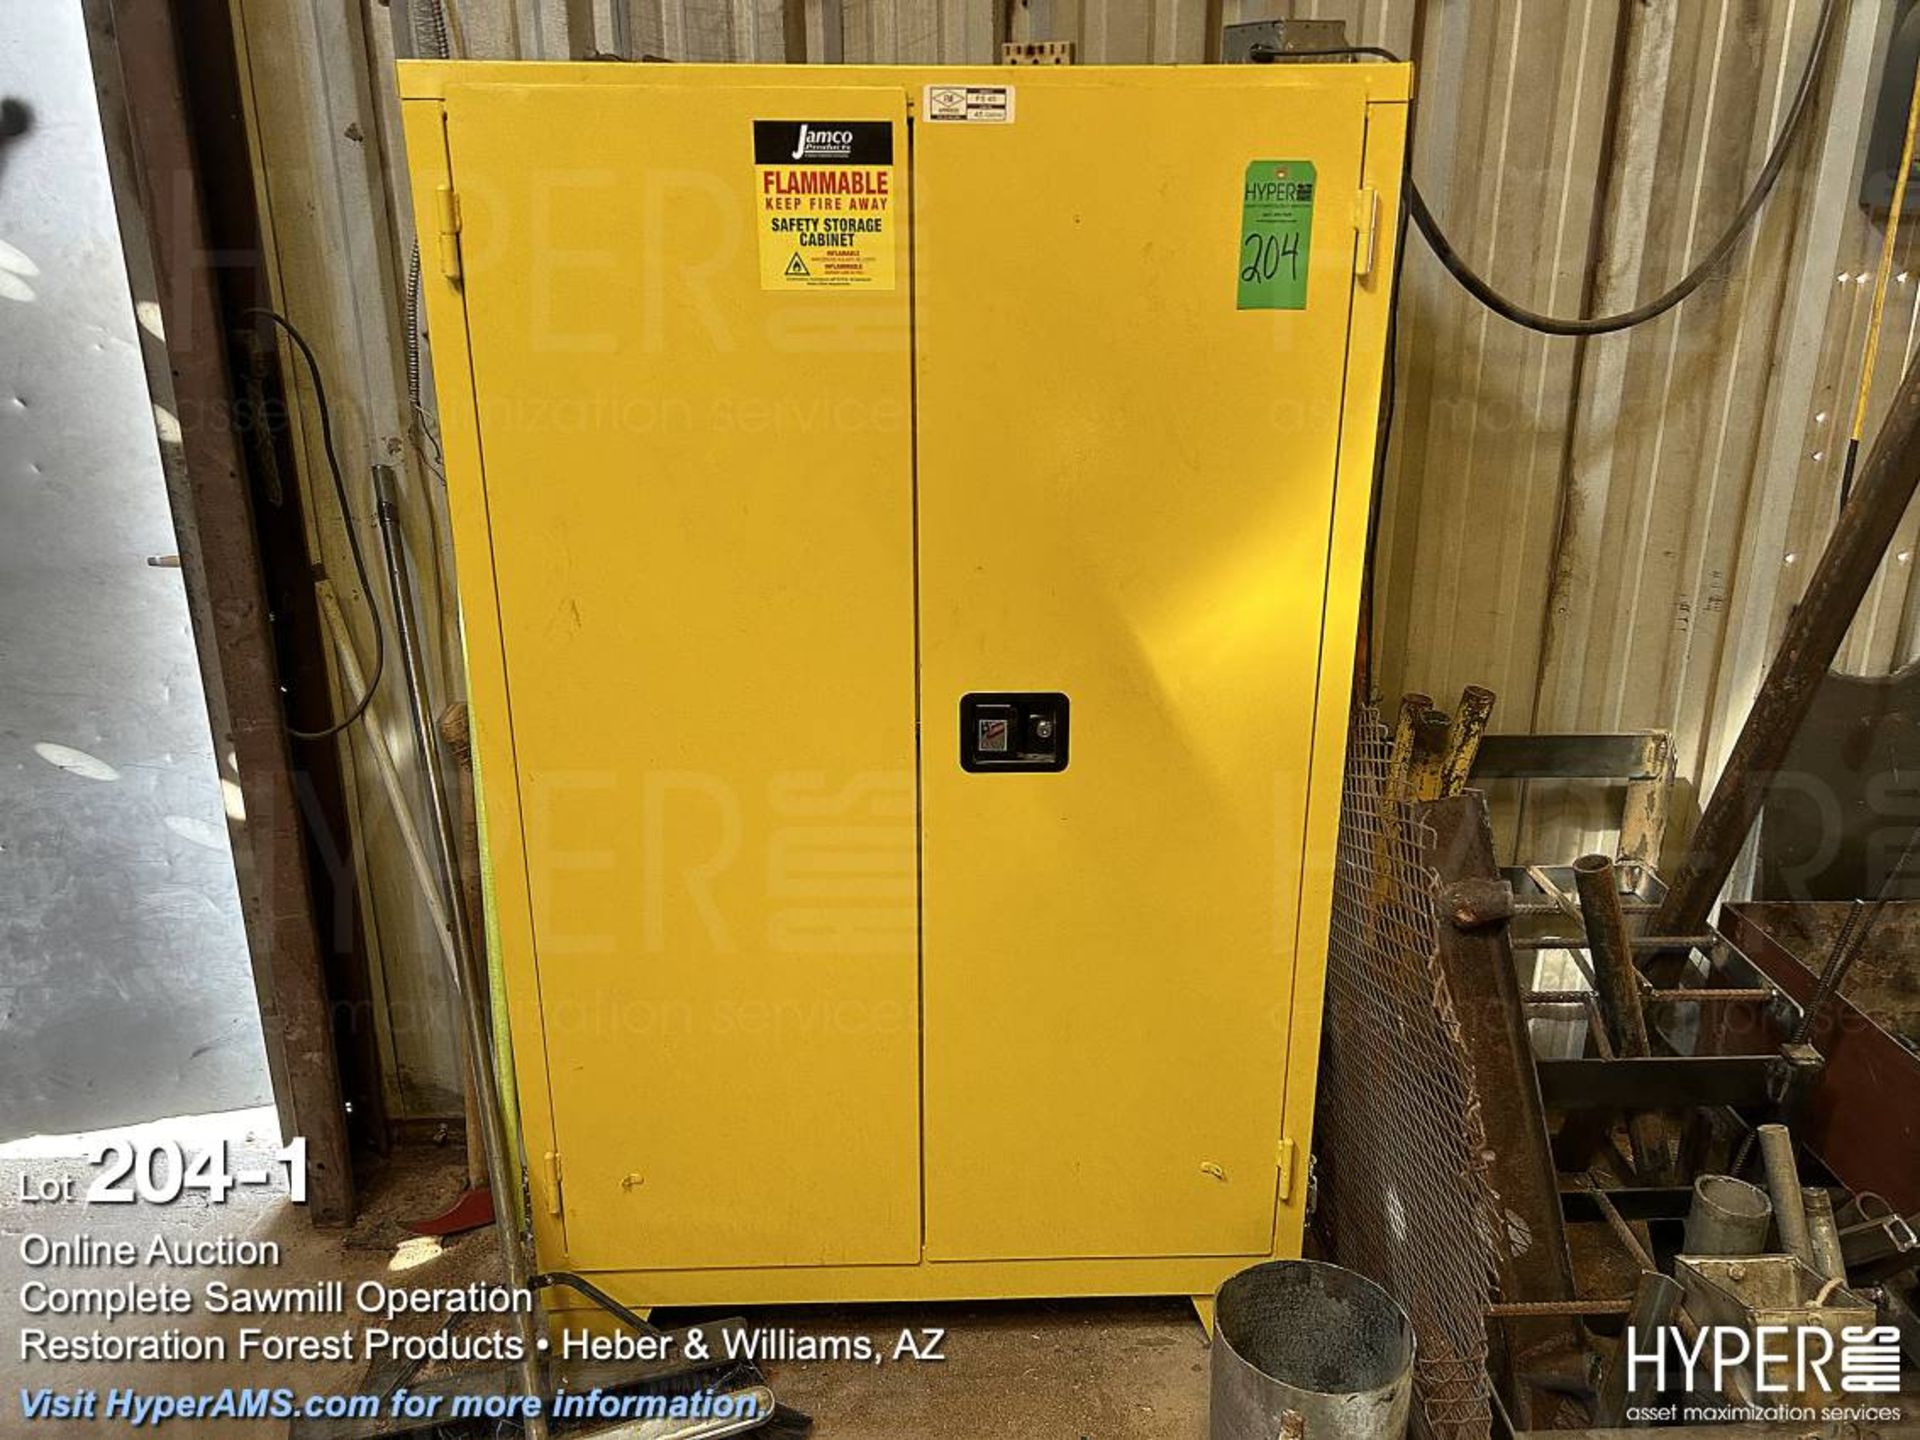 Jamco flammable storage cabinet